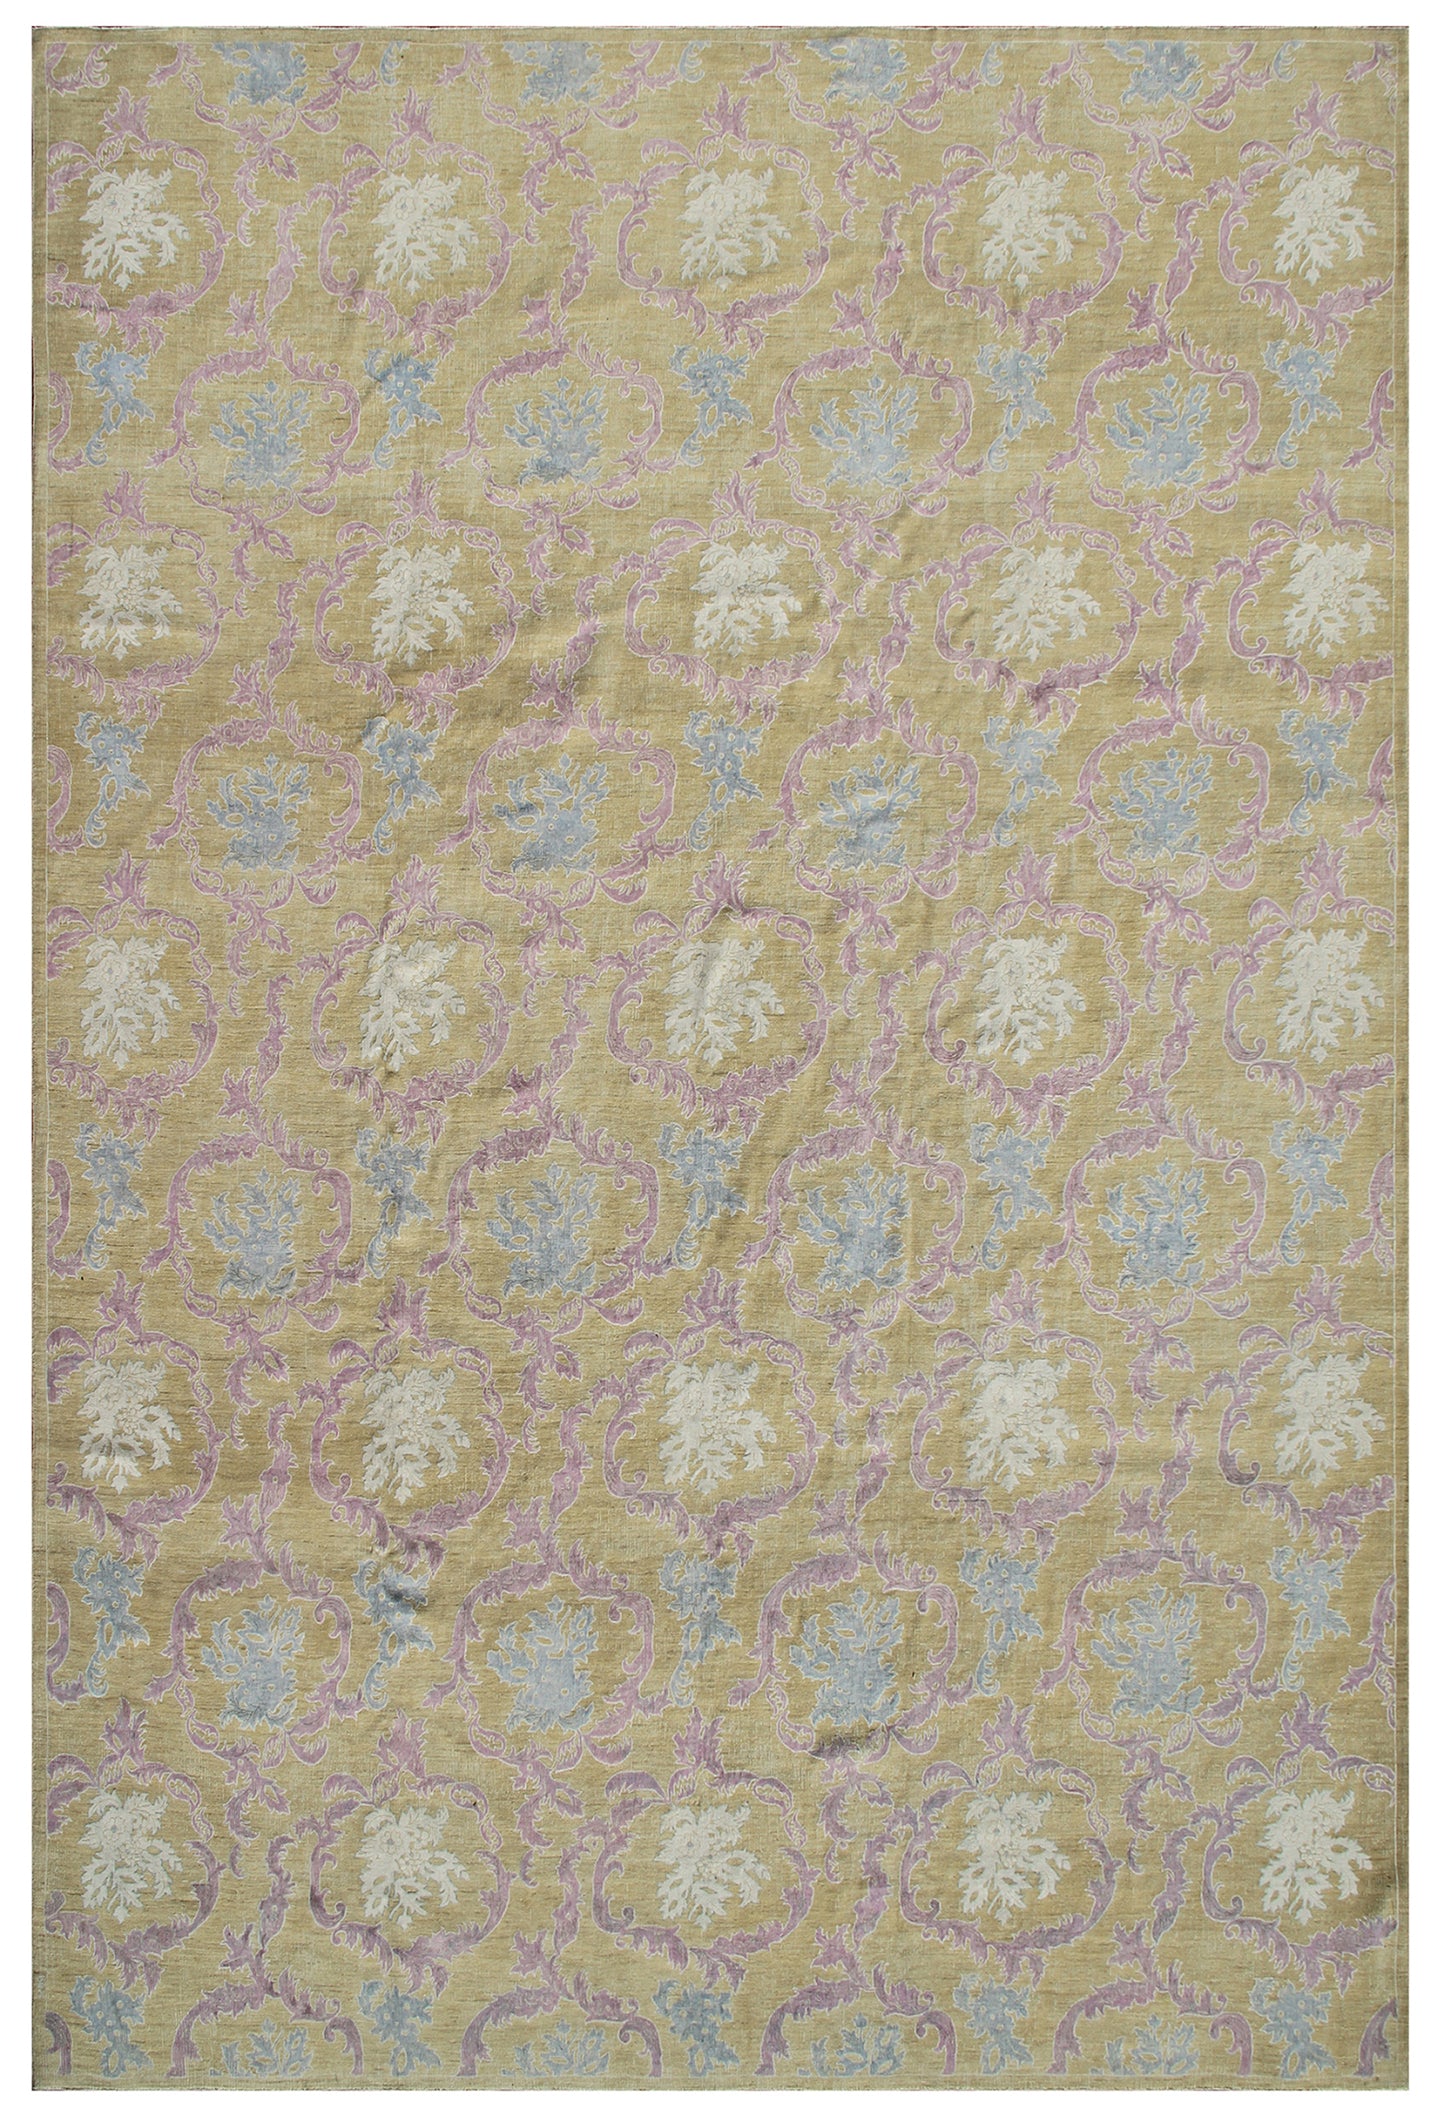 10'x14' Wool and Art Silk Ariana Transitional Floral Rug